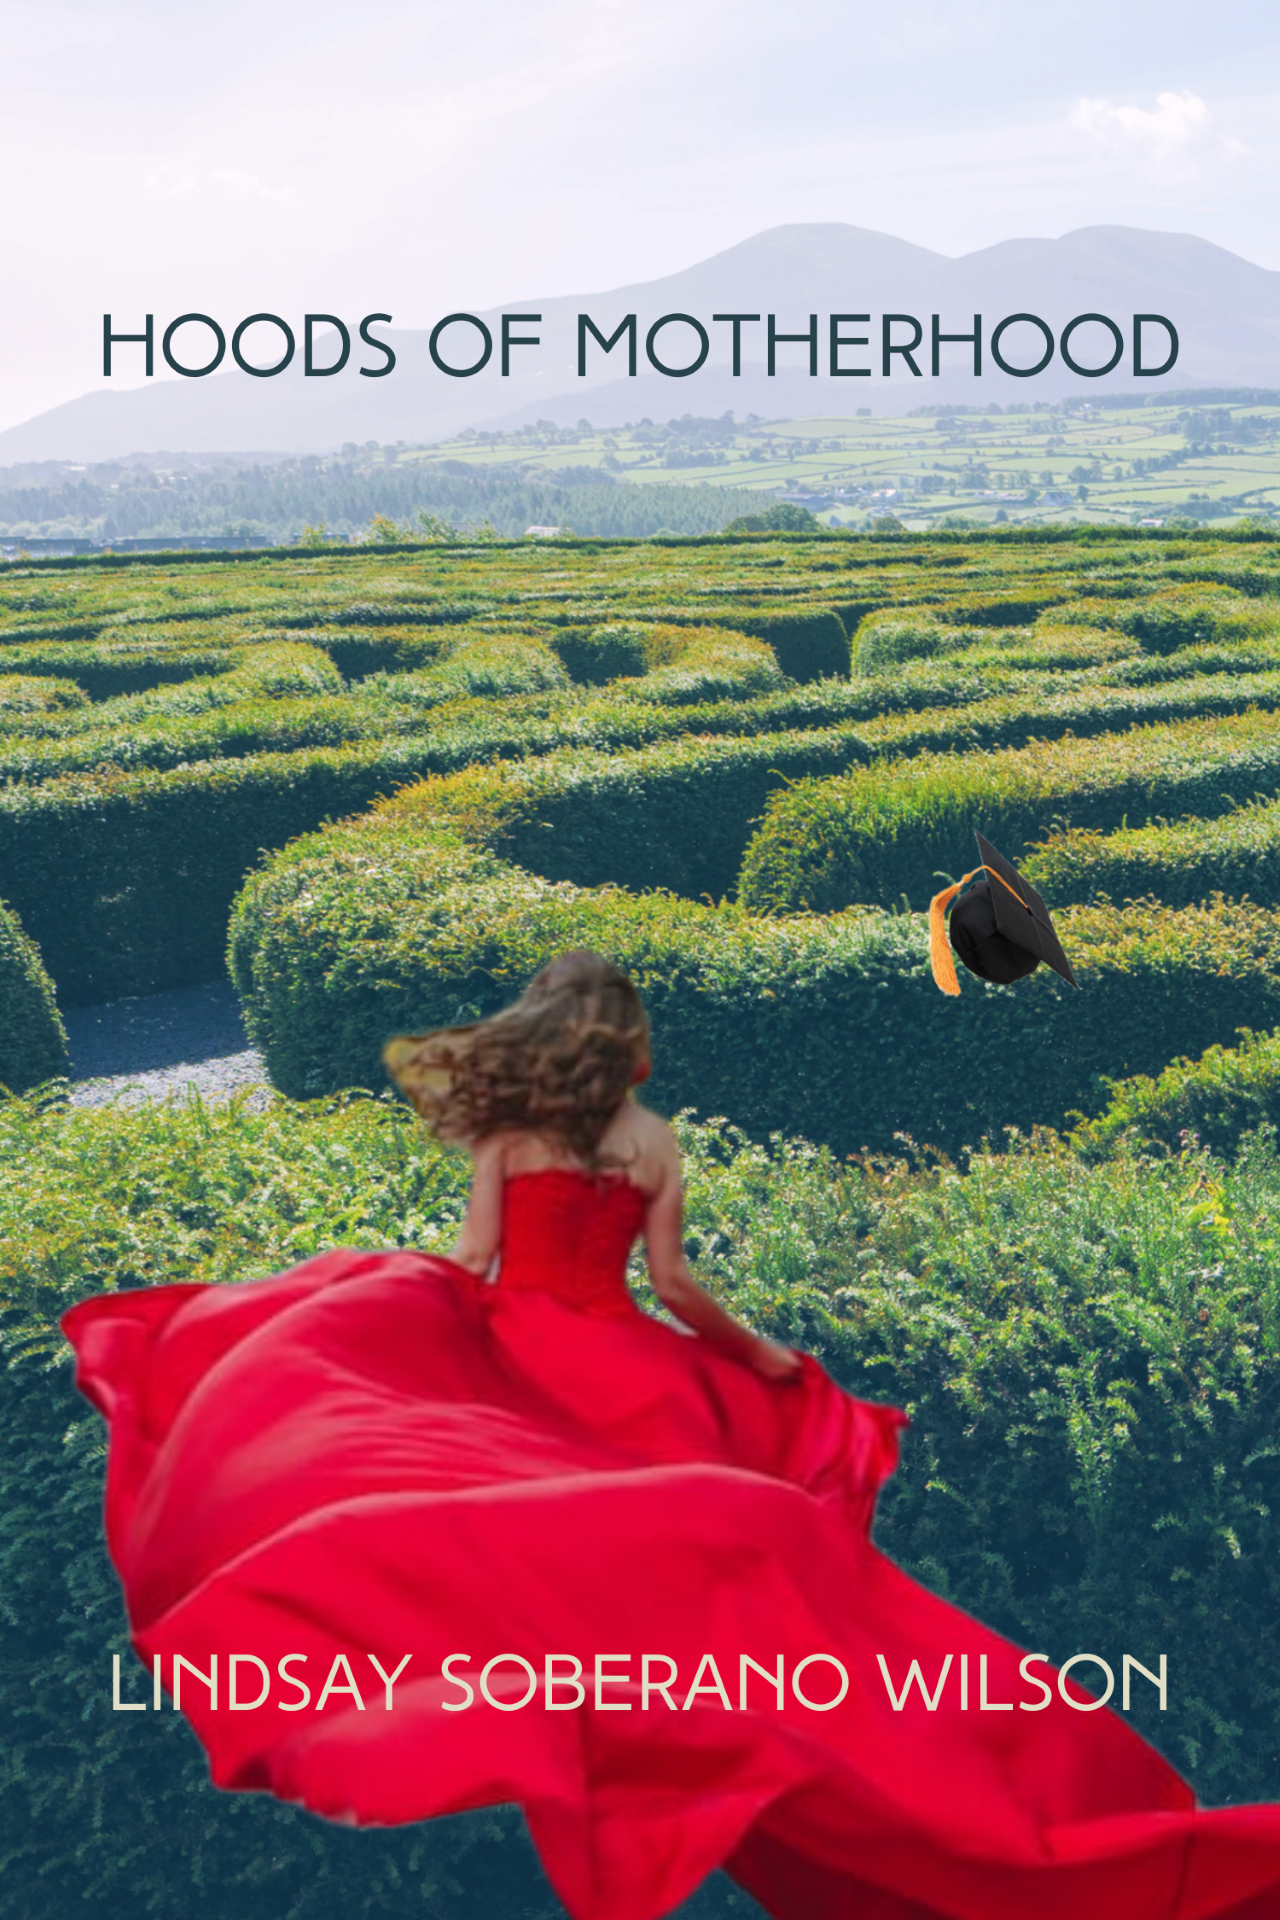 Cover of 'Hoods of Motherhood' by Lindsay Soberano Wilson, depicting a woman in a red dress running through a green maze.